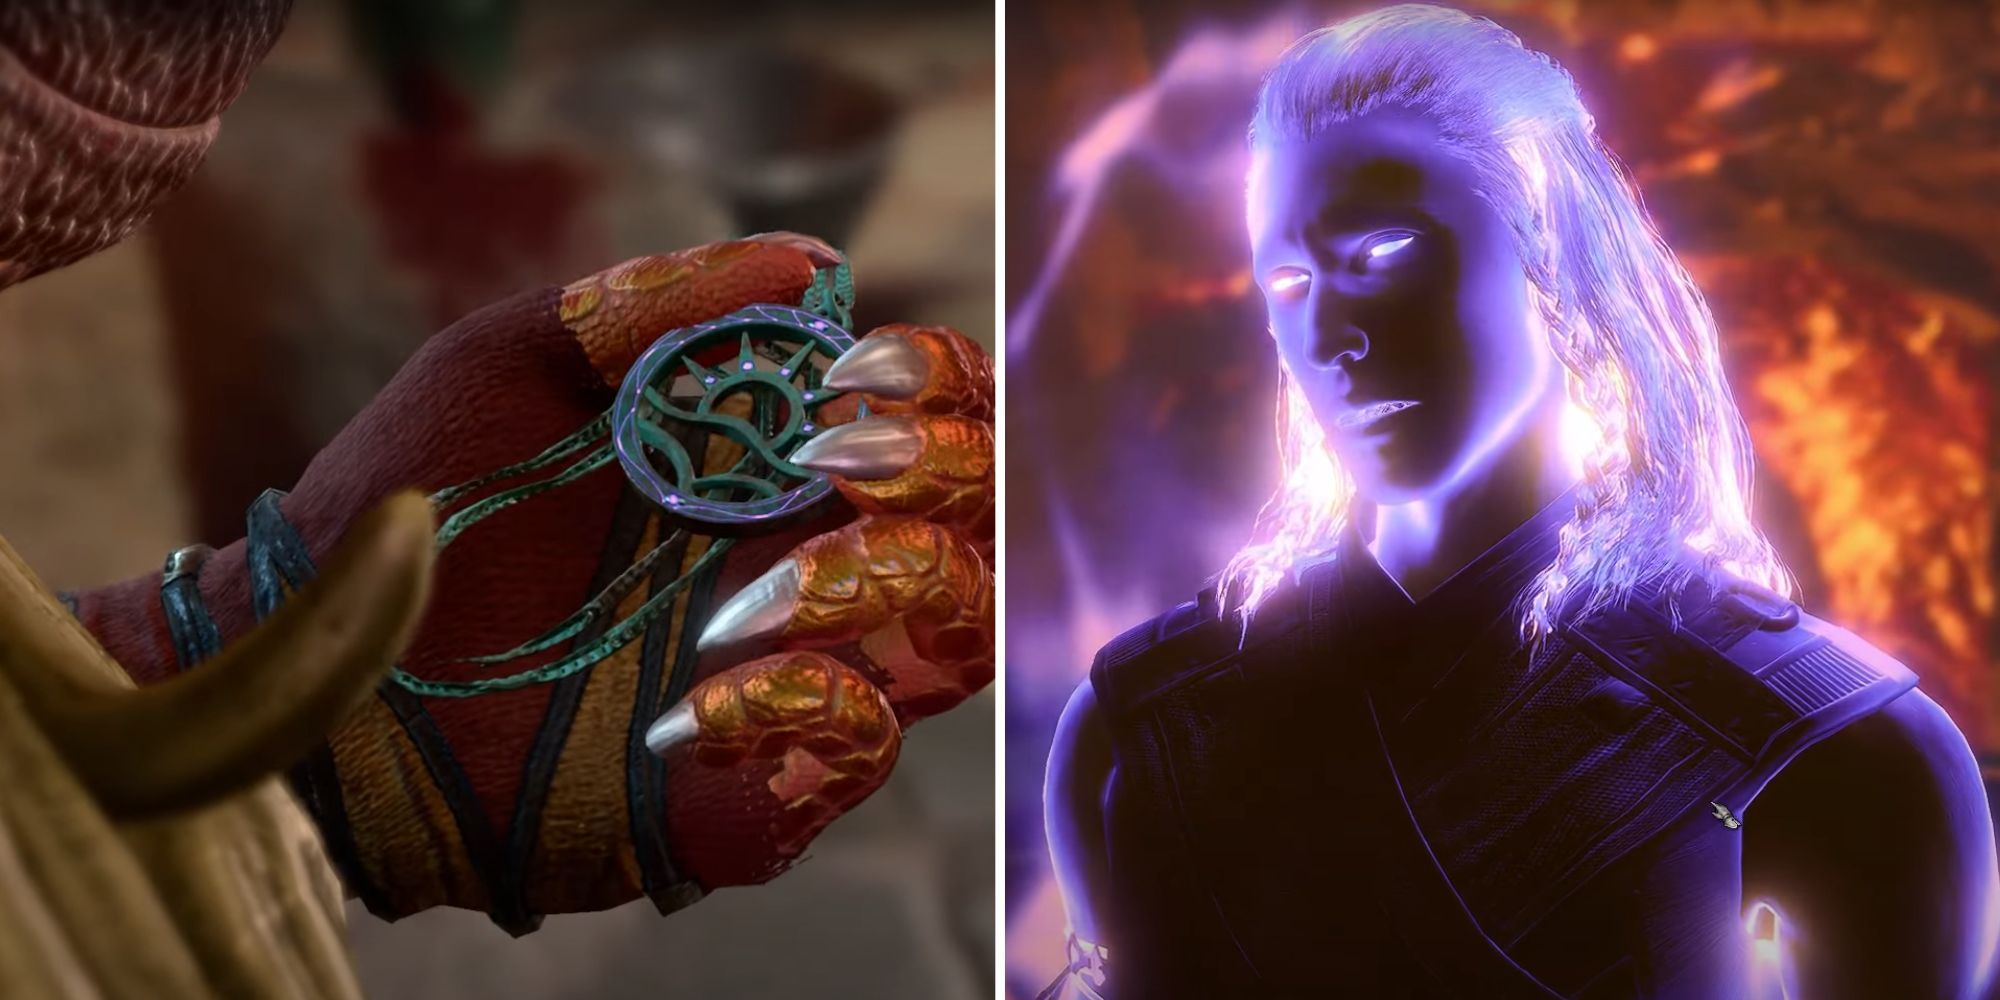 A split image of a scaly, red Dragonborn hand holding an amulet, and the purple spirit of the Cursed Monk.